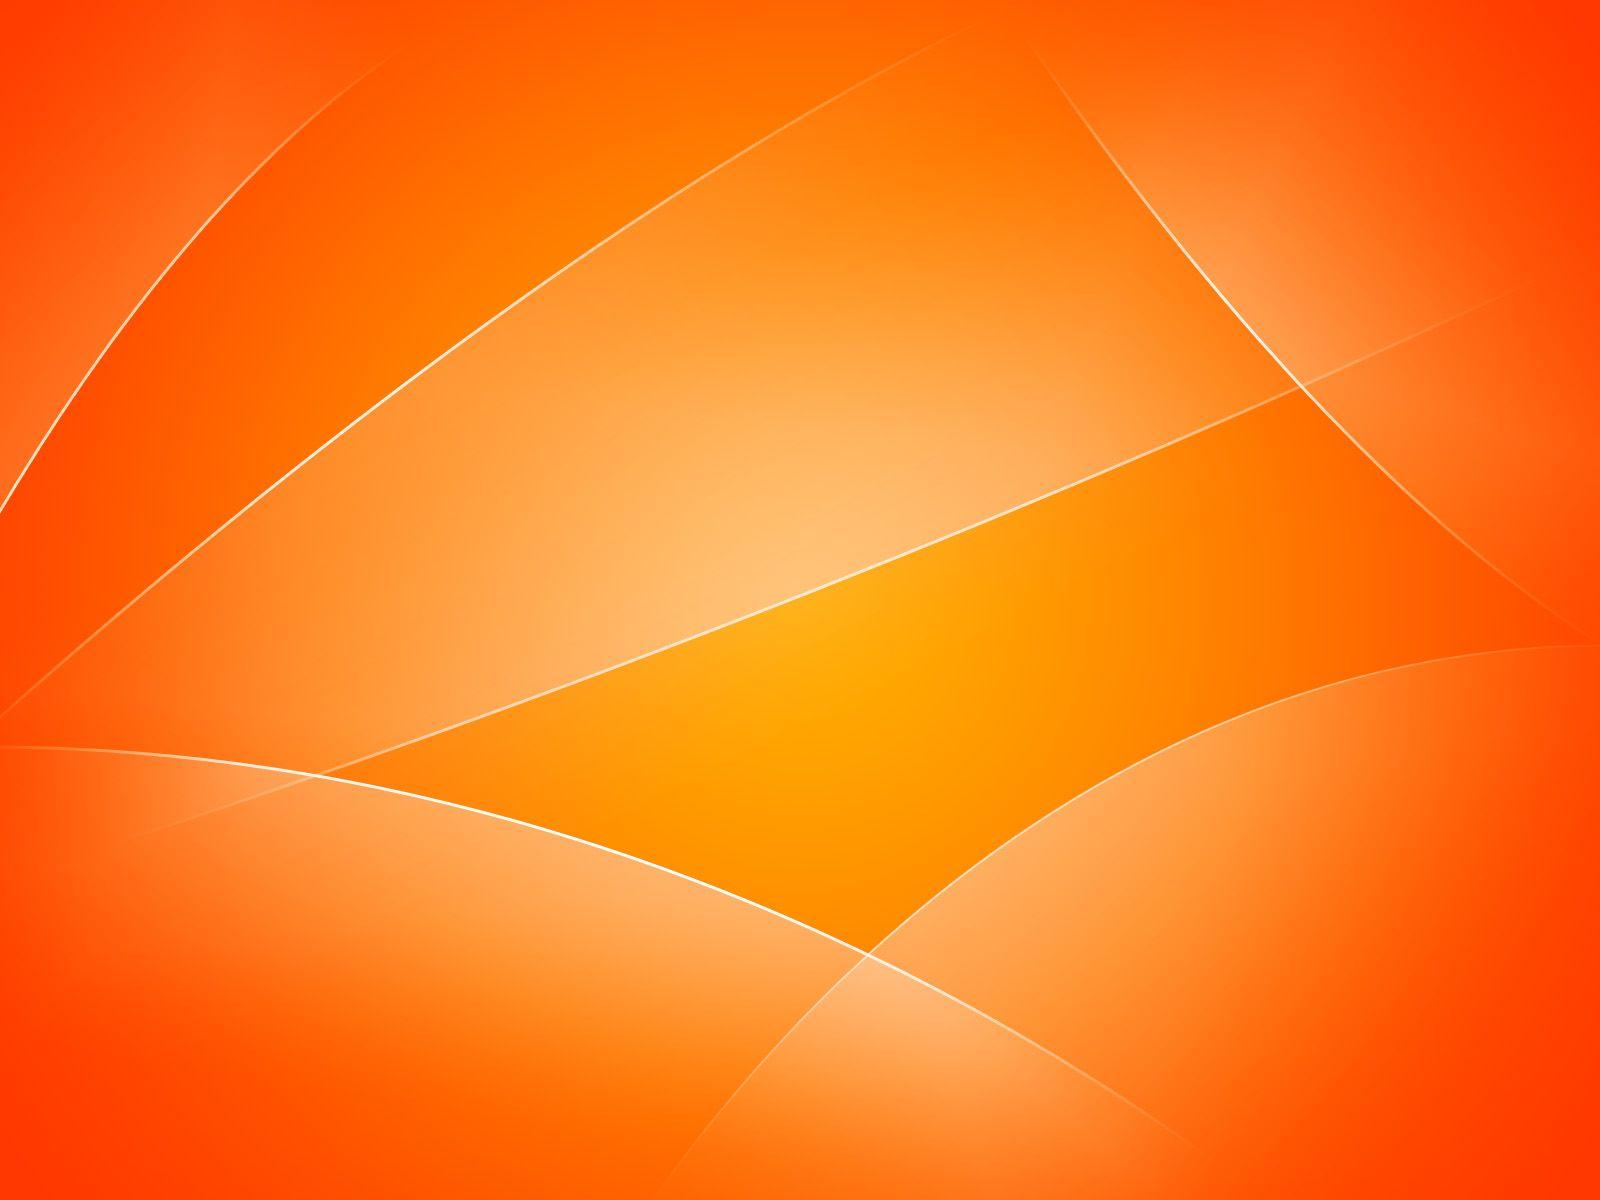 cool orange background 7. Background Check All